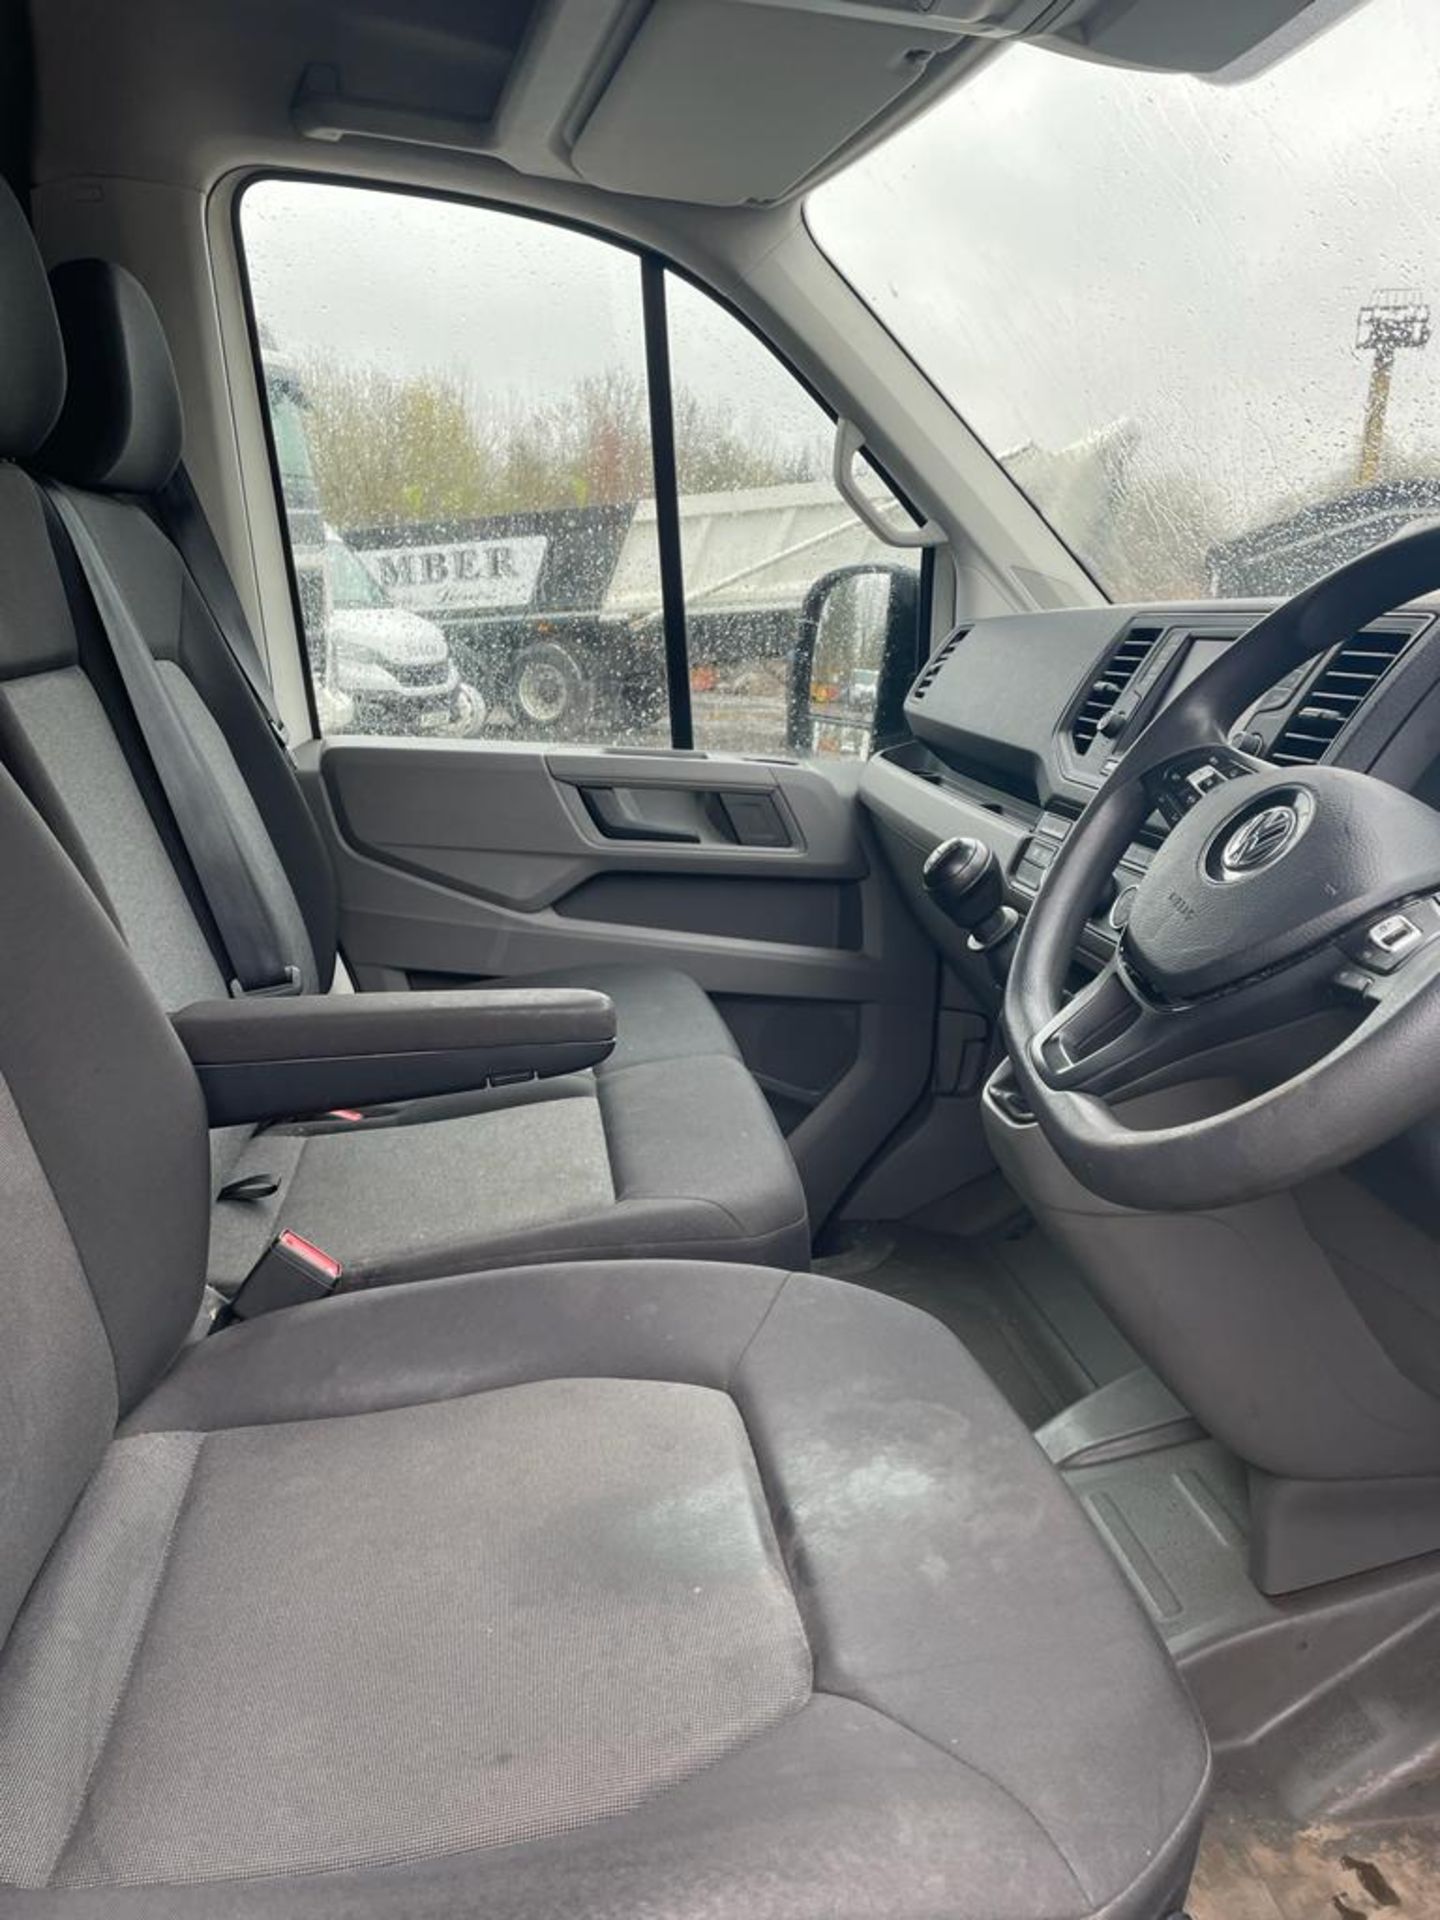 2019 Volkswagen Crafter CR35 TDI Blue Motion - Euro 6 ULEZ Compliant - Image 6 of 8